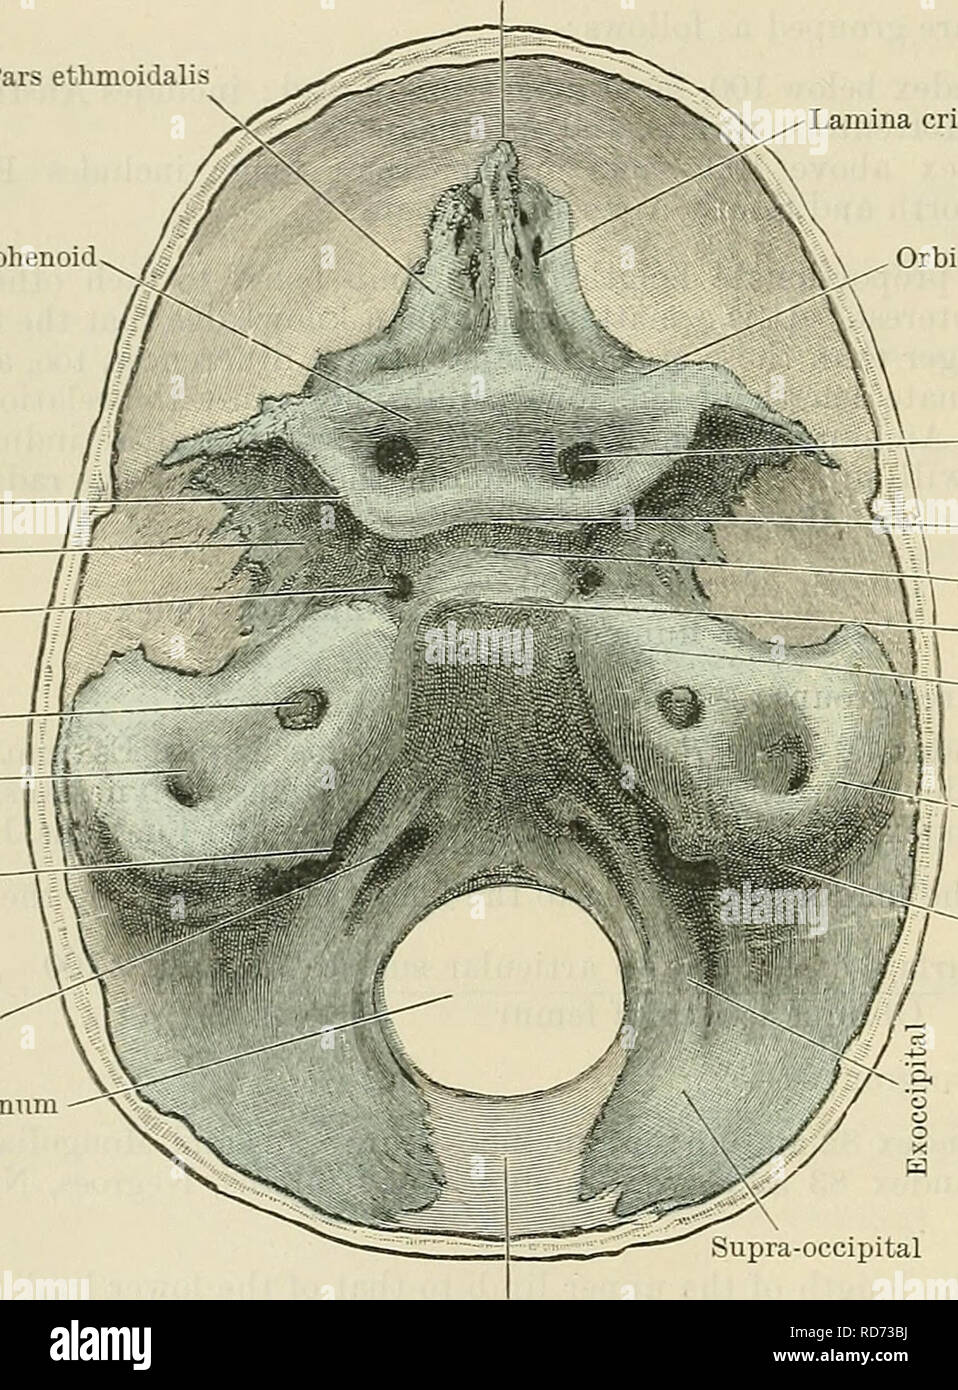 . Cunningham's Text-book of anatomy. Anatomy. 290 OSTEOLOGY. APPENDIX E. DEVELOPMENT OF THE CHONDRO-CRANIUM AND MORPHOLOGY OF THE SKULL. As has been already stated, the chorda dorsalis or notochord extends forwards to a point immediately beneath the anterior end of the mid-brain. In front of this the head takes a bend so that the large fore-brain overlaps the anterior extremity of the notochord. At this stage of development the cerebral vesicles are enclosed in a membranous covering derived from the mesen- Crista Galli Pars ethmoidals Lamina cribrosa Orbito-sphenoid Superior orbital fissure 77 Stock Photo